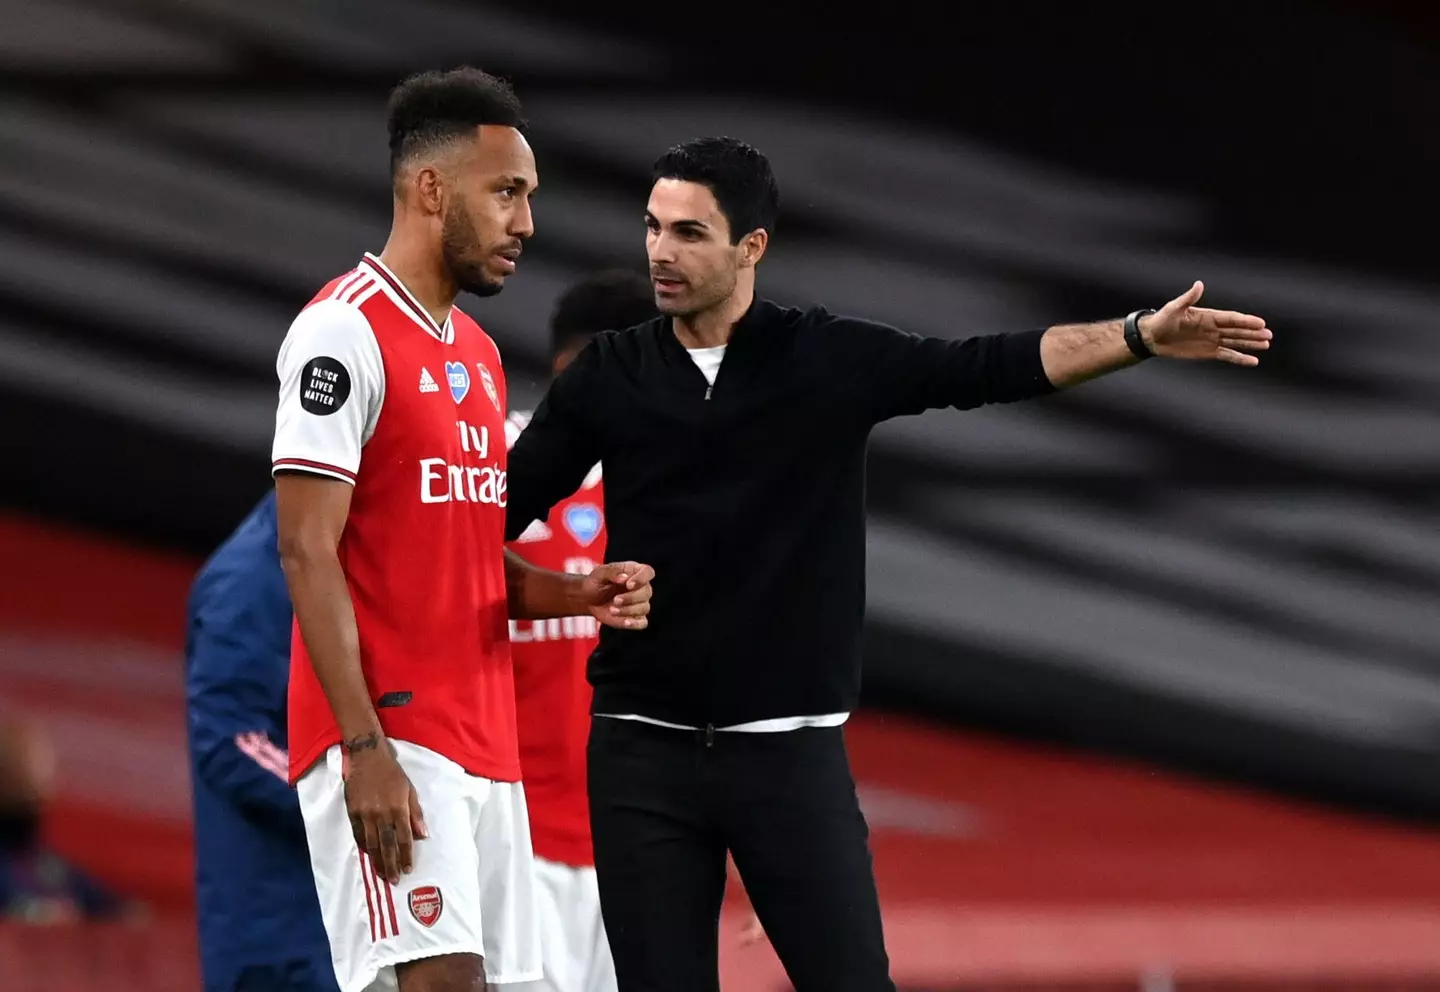 Aubameyang was stripped of the captaincy after missing the Southampton game due to 'disciplinary reasons.' Image: Alamy